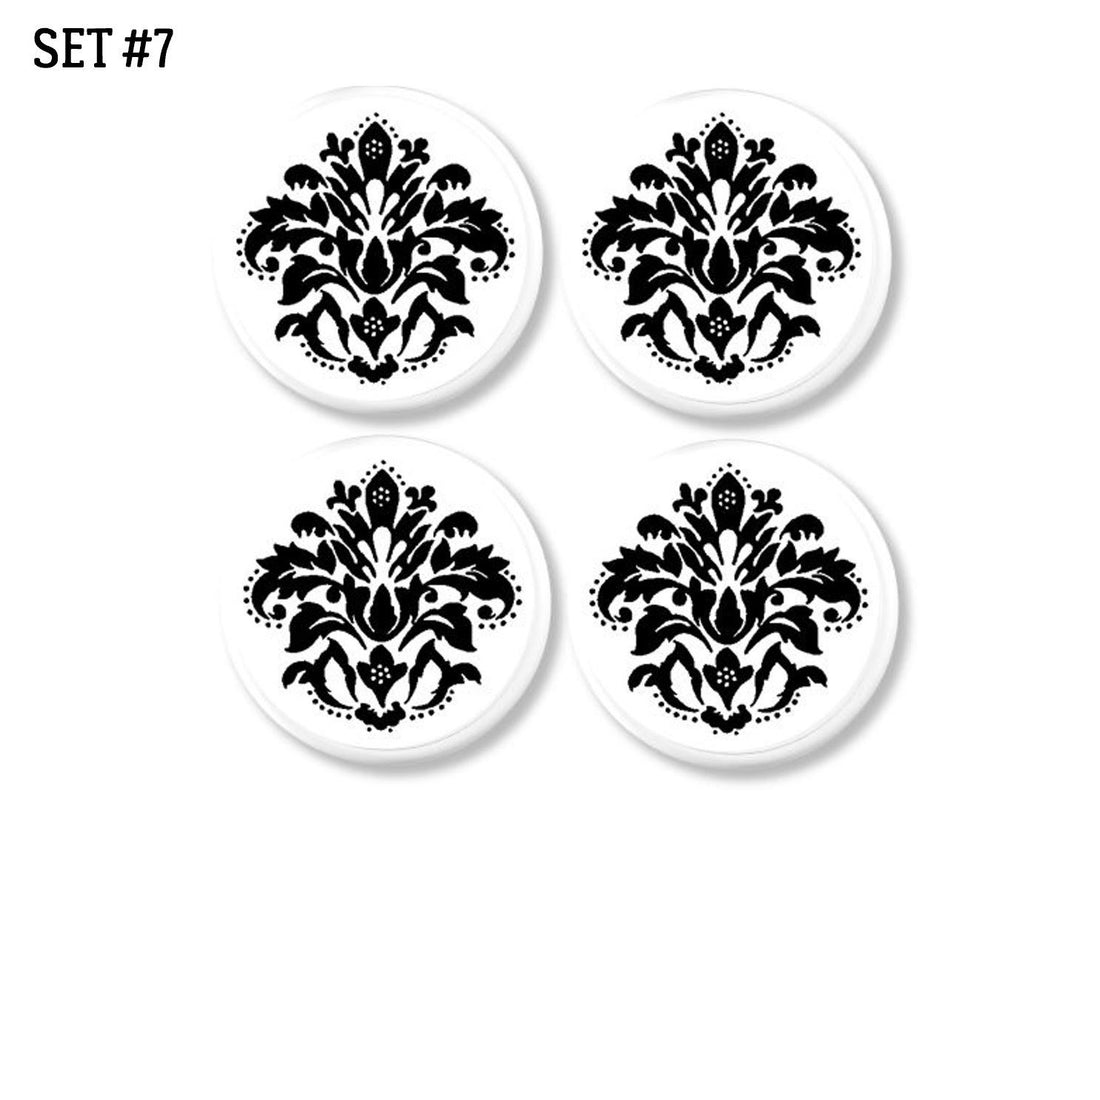 4 Classic black white damask cabinet drawer pulls. Knobs for French Victorian, Steampunk or Gothic decor.